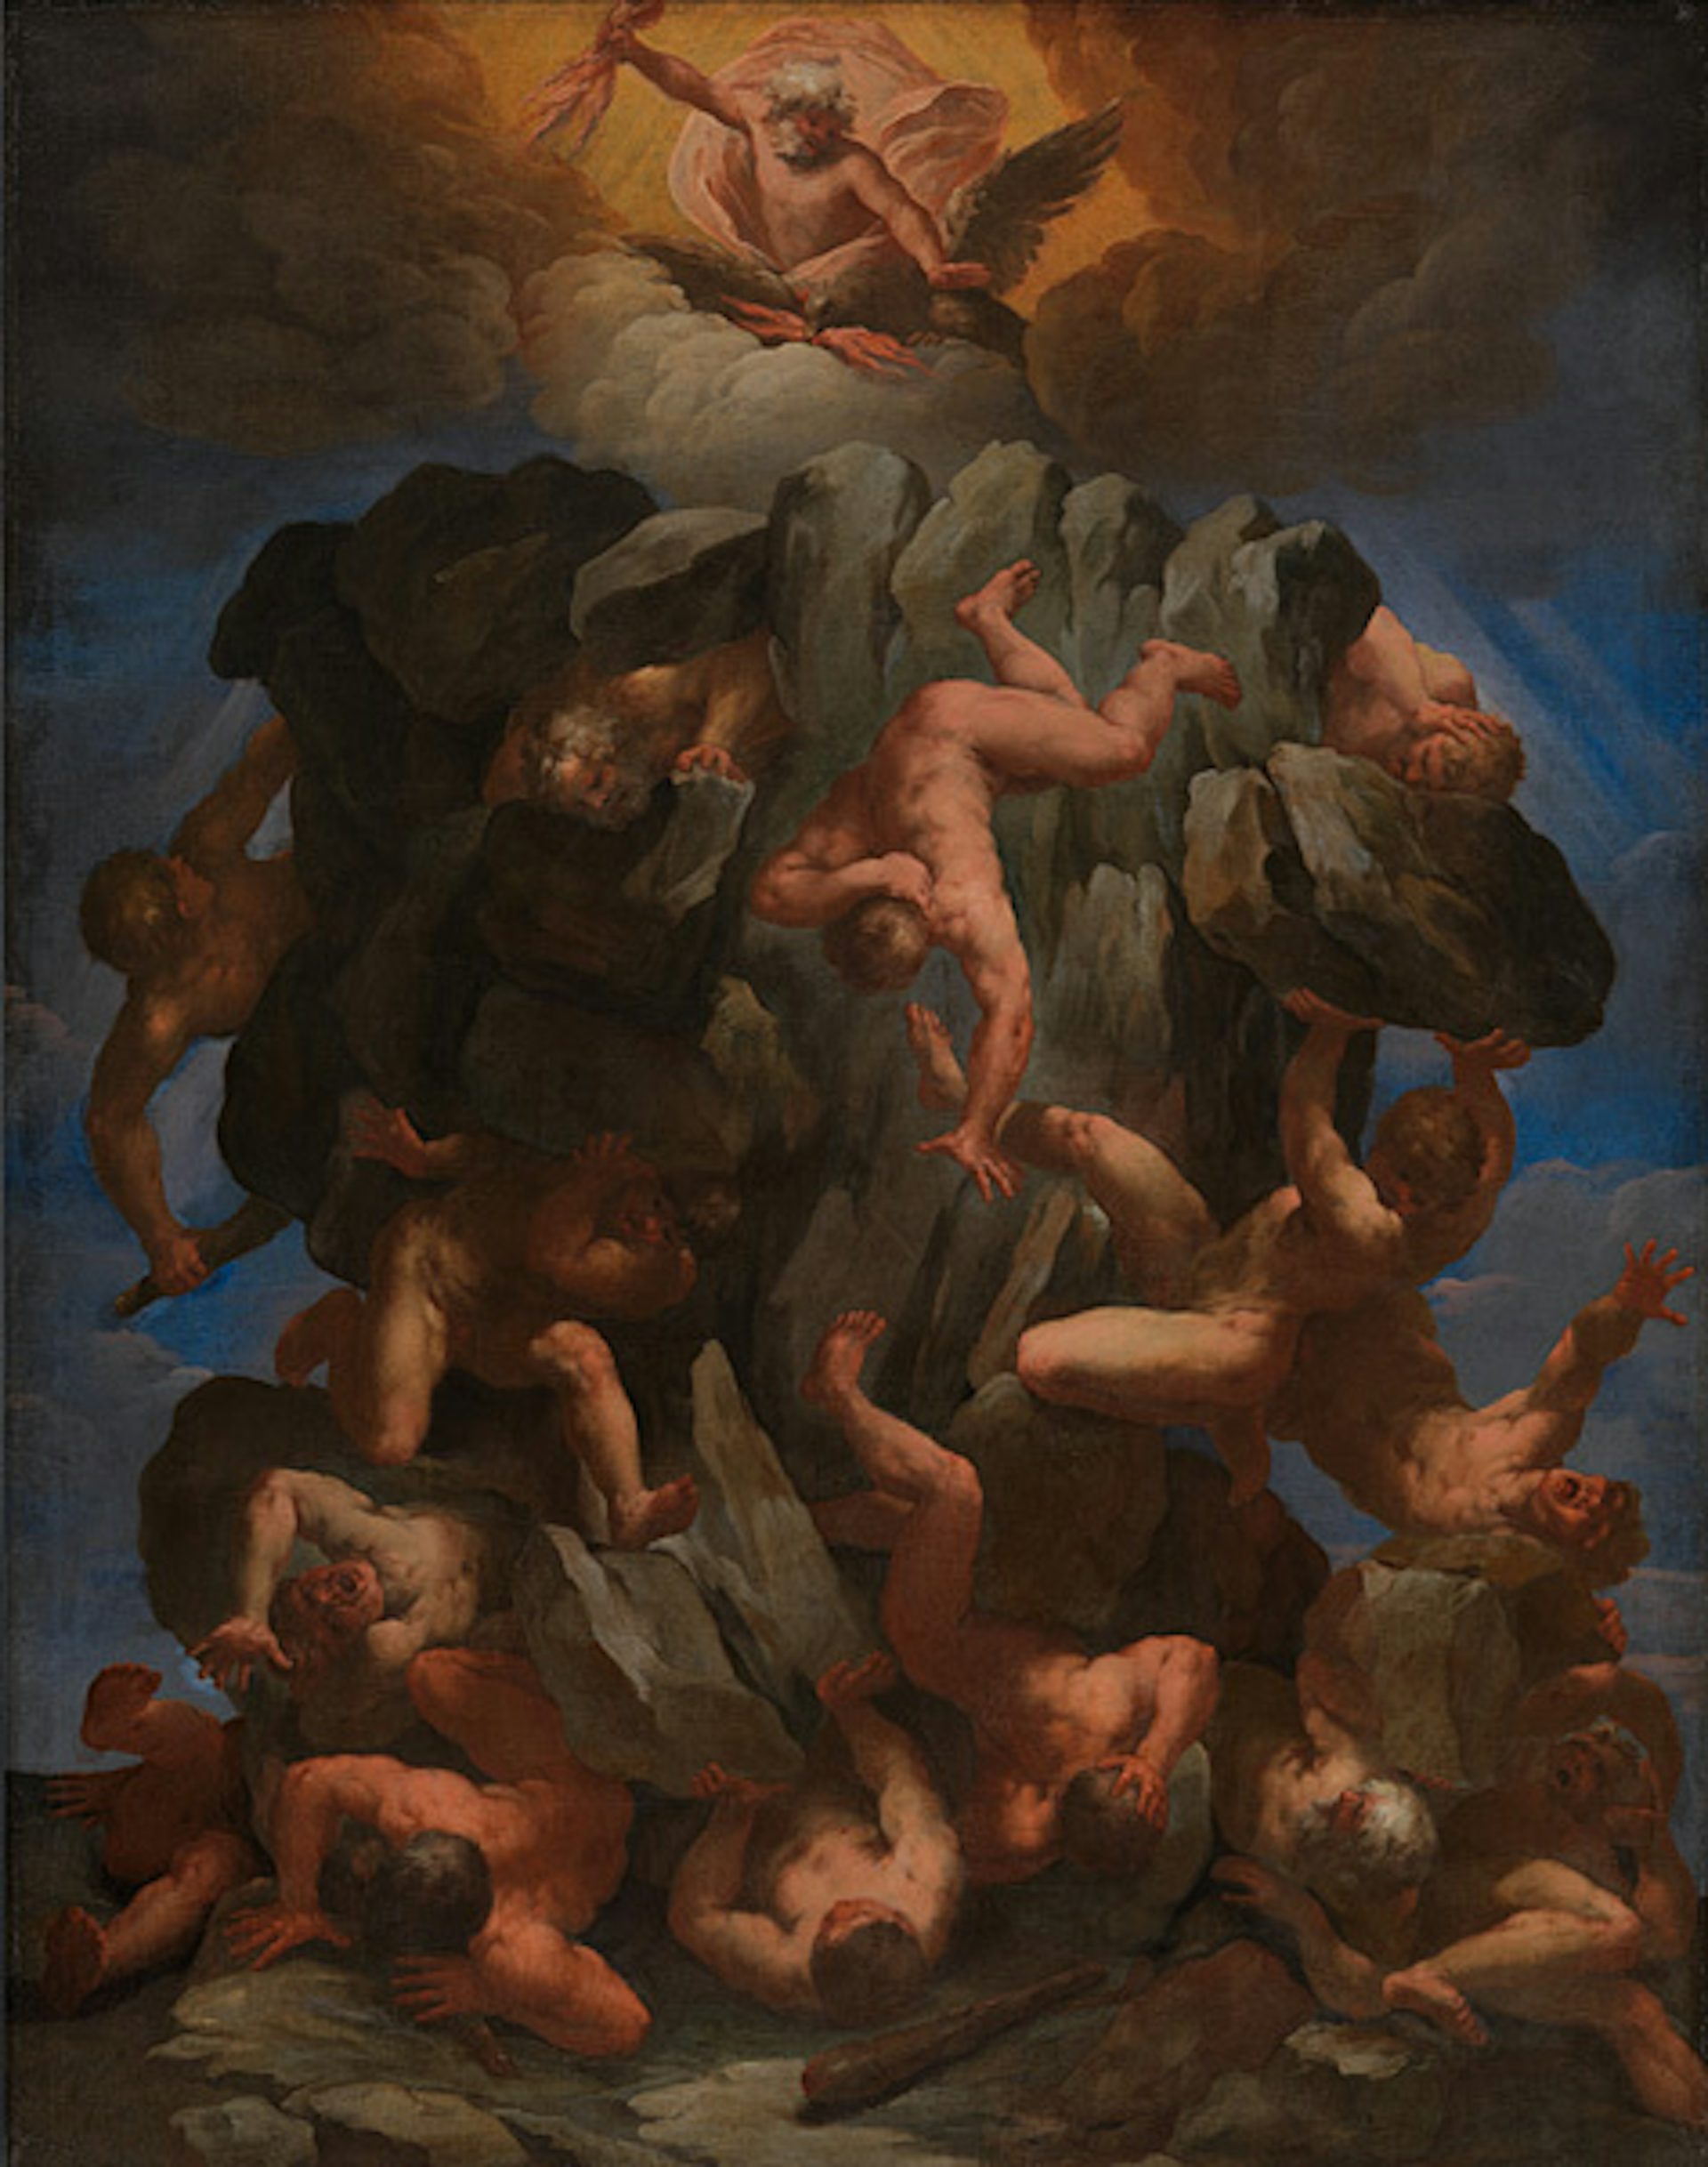 The fall of the giants by Guido Reni, circa 1590-1642